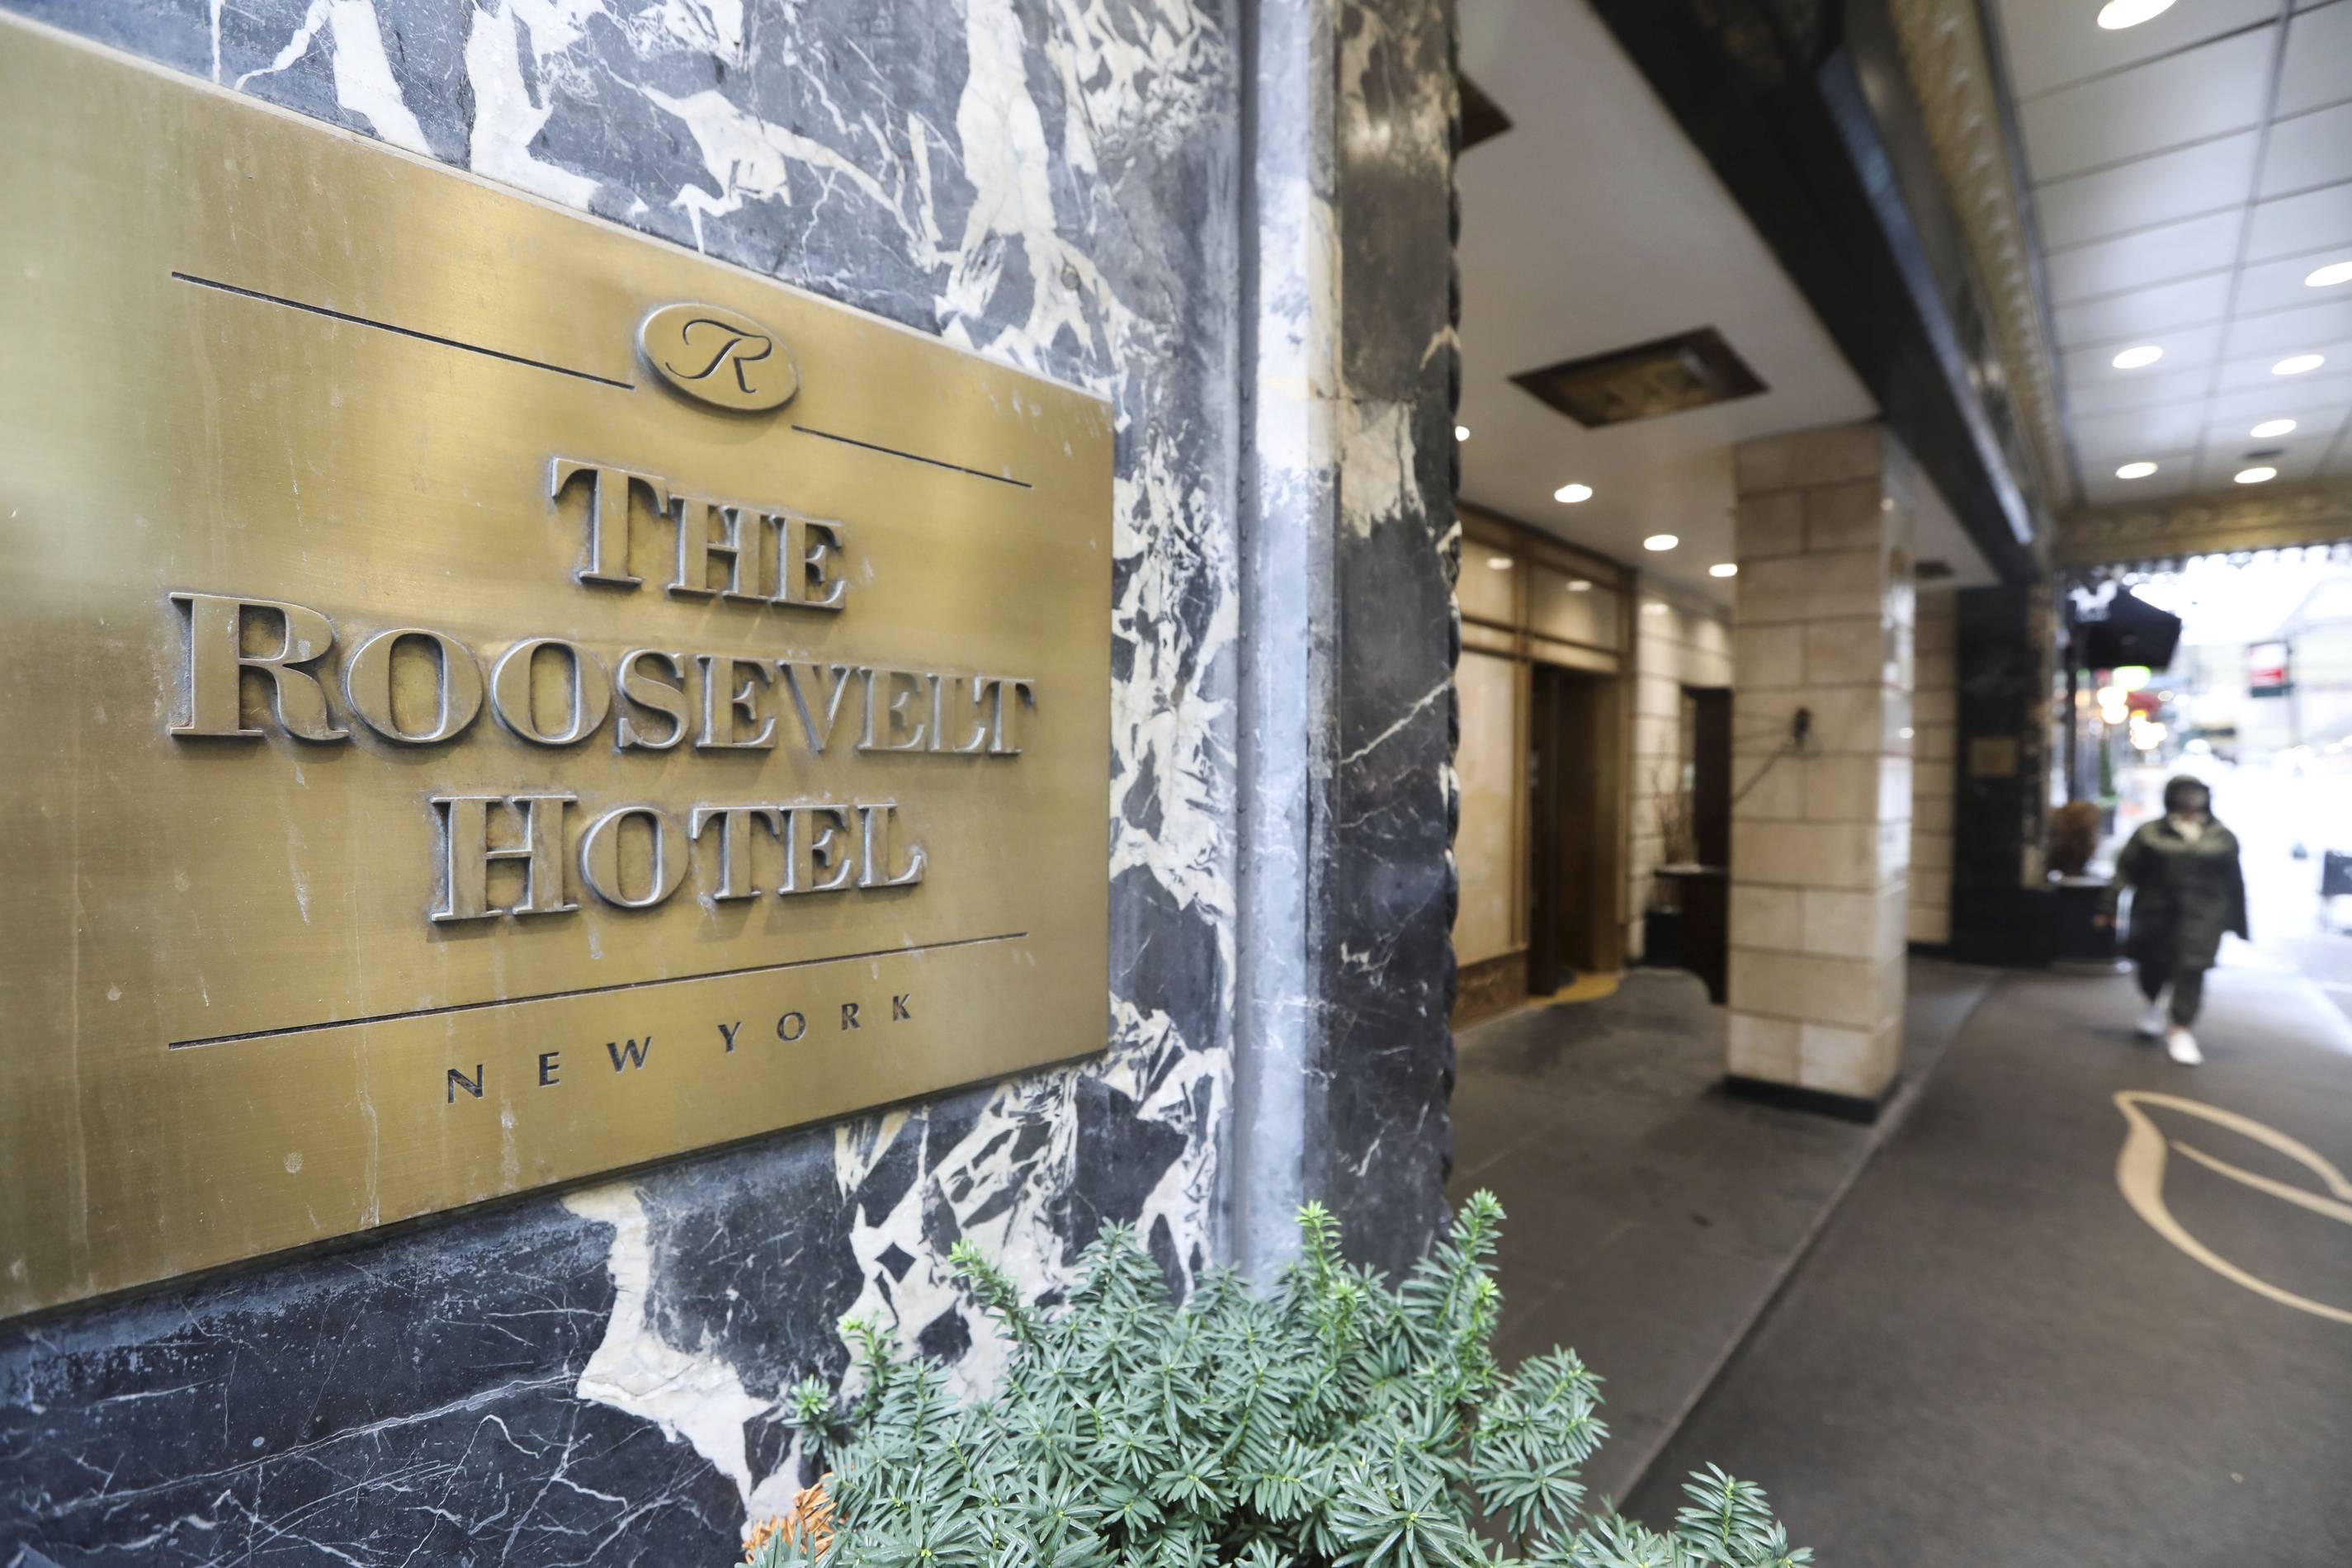 NYC's iconic Roosevelt Hotel will close its doors this year